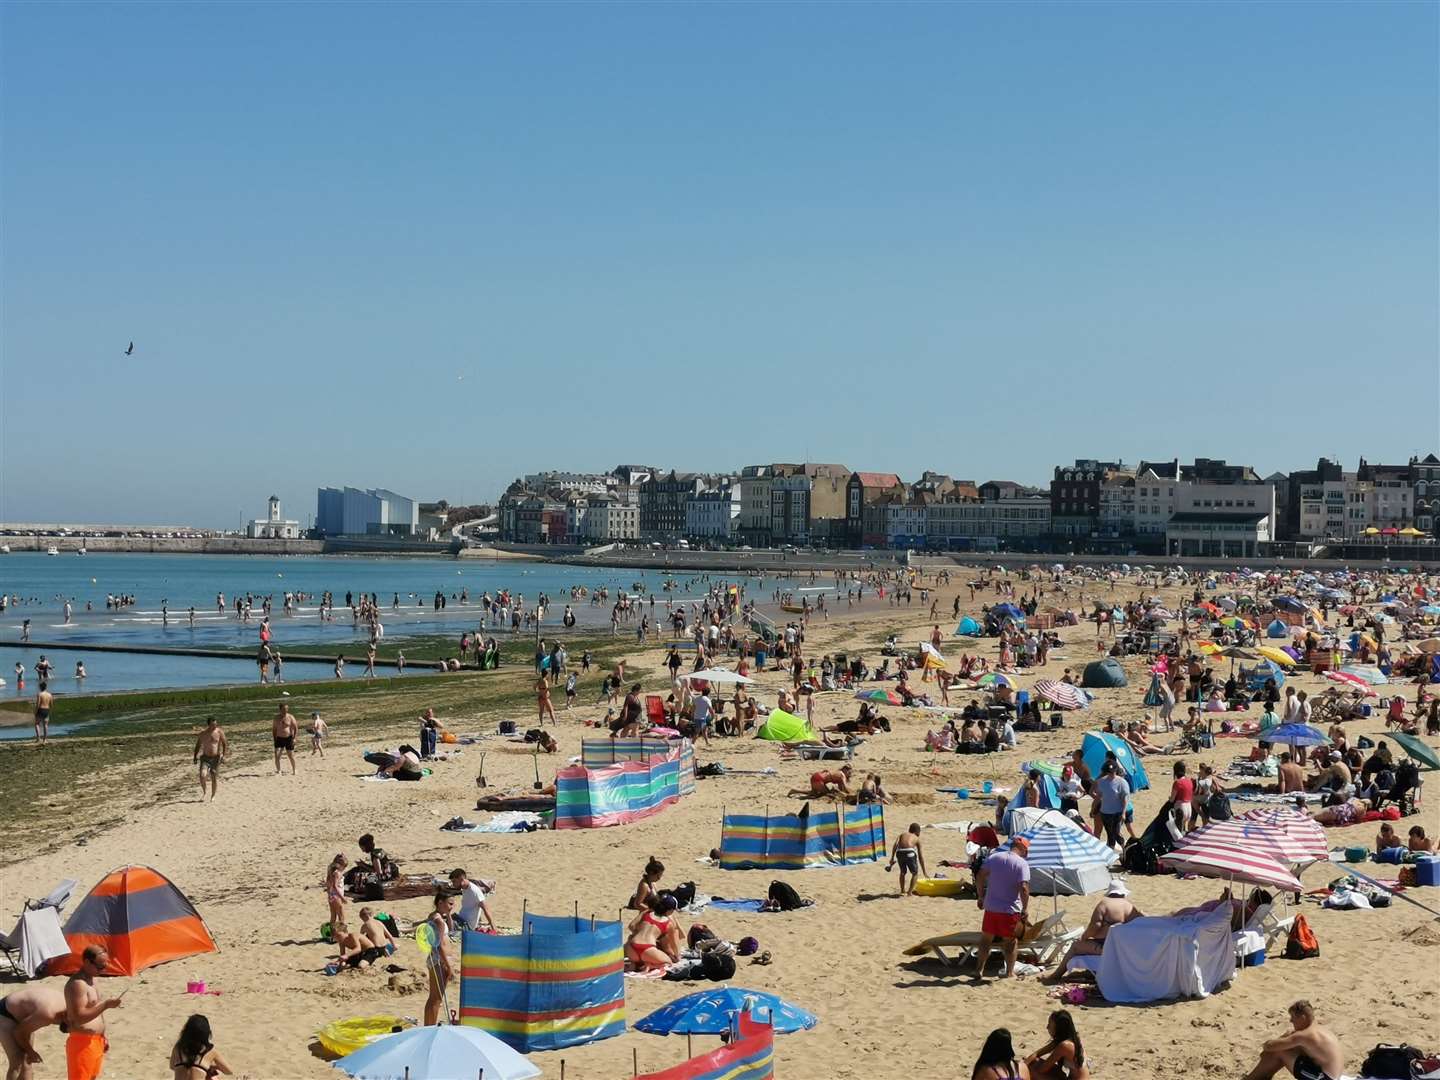 The hot weather has drawn crowds to the Margate coast, but some beach-goers have left letter behind